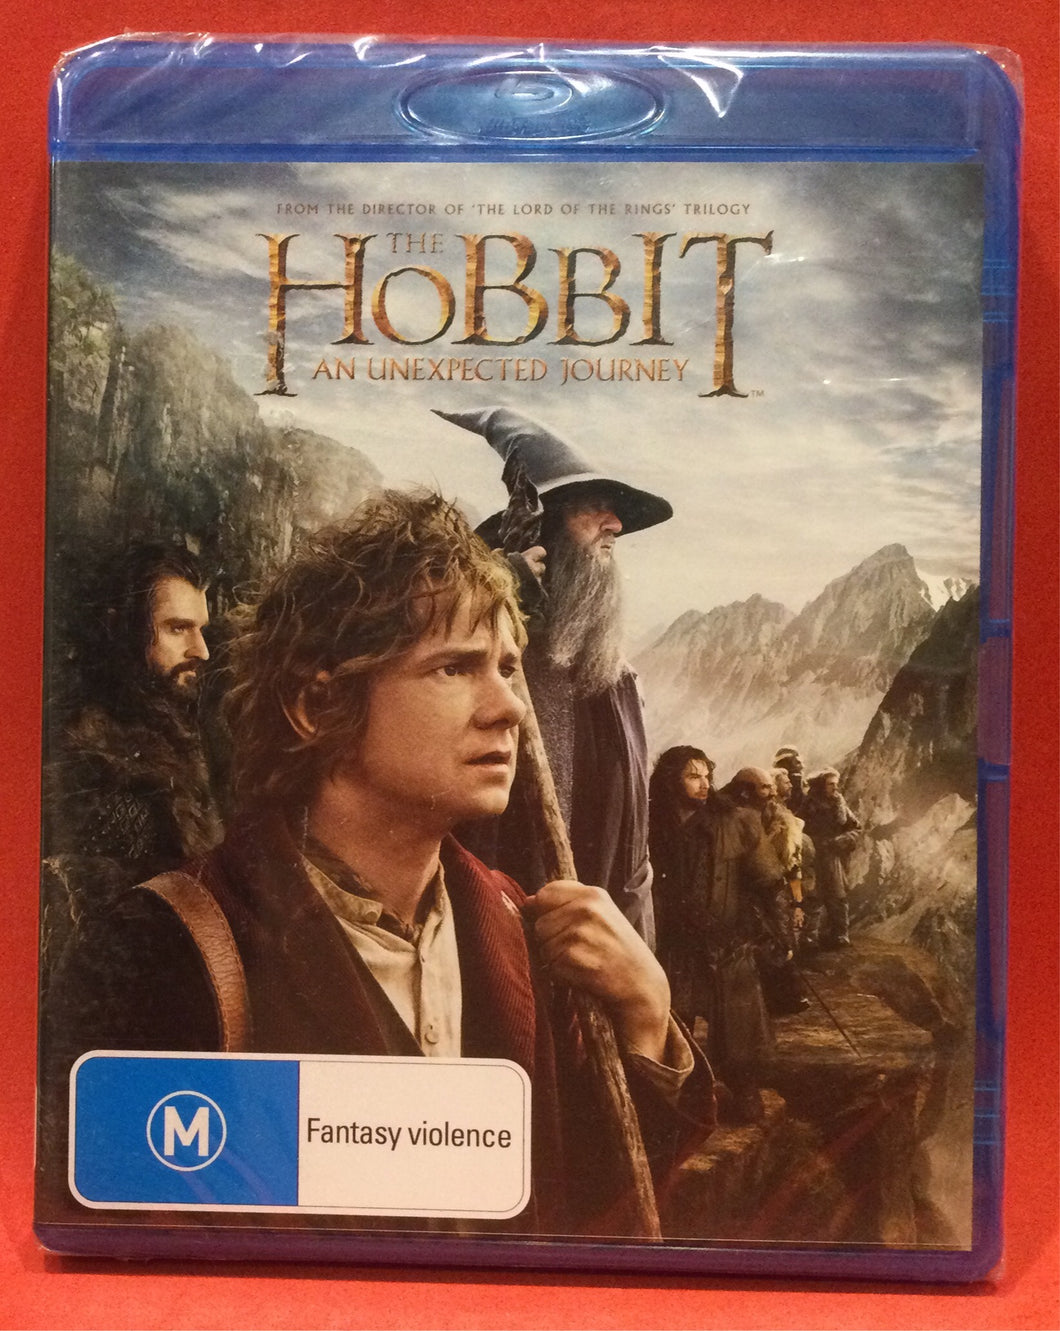 HOBBIT, THE - AND UNEXPECTED JOURNEY - BLU-RAY DVD (SEALED)